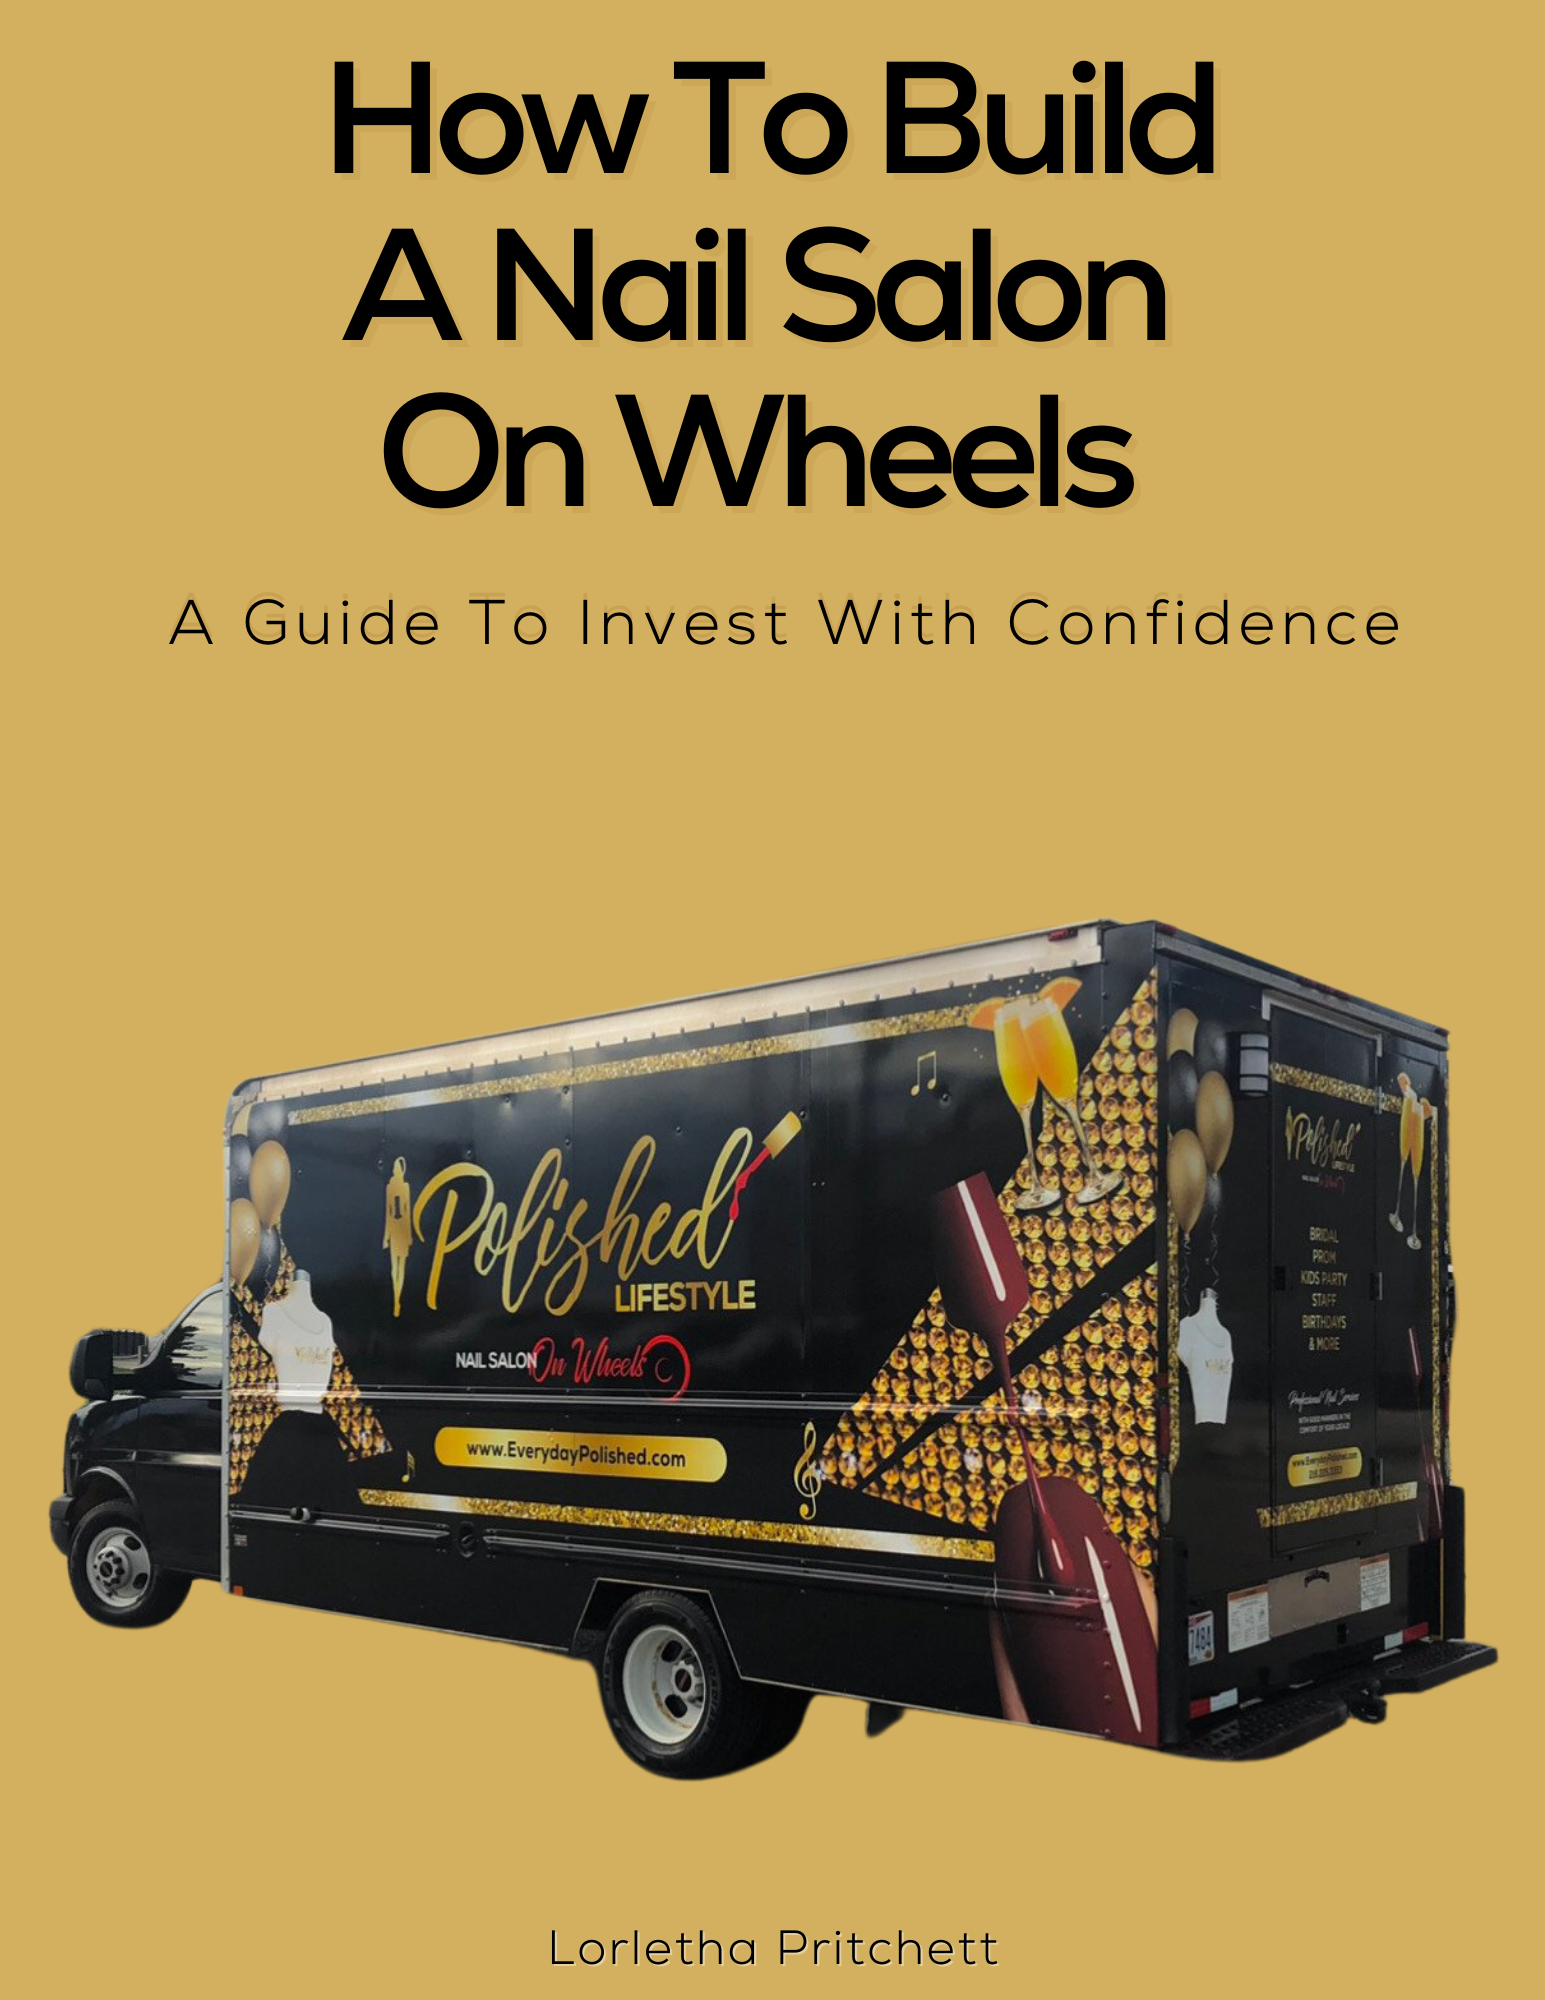 Copy of How To Build A Nail Salon On Wheels